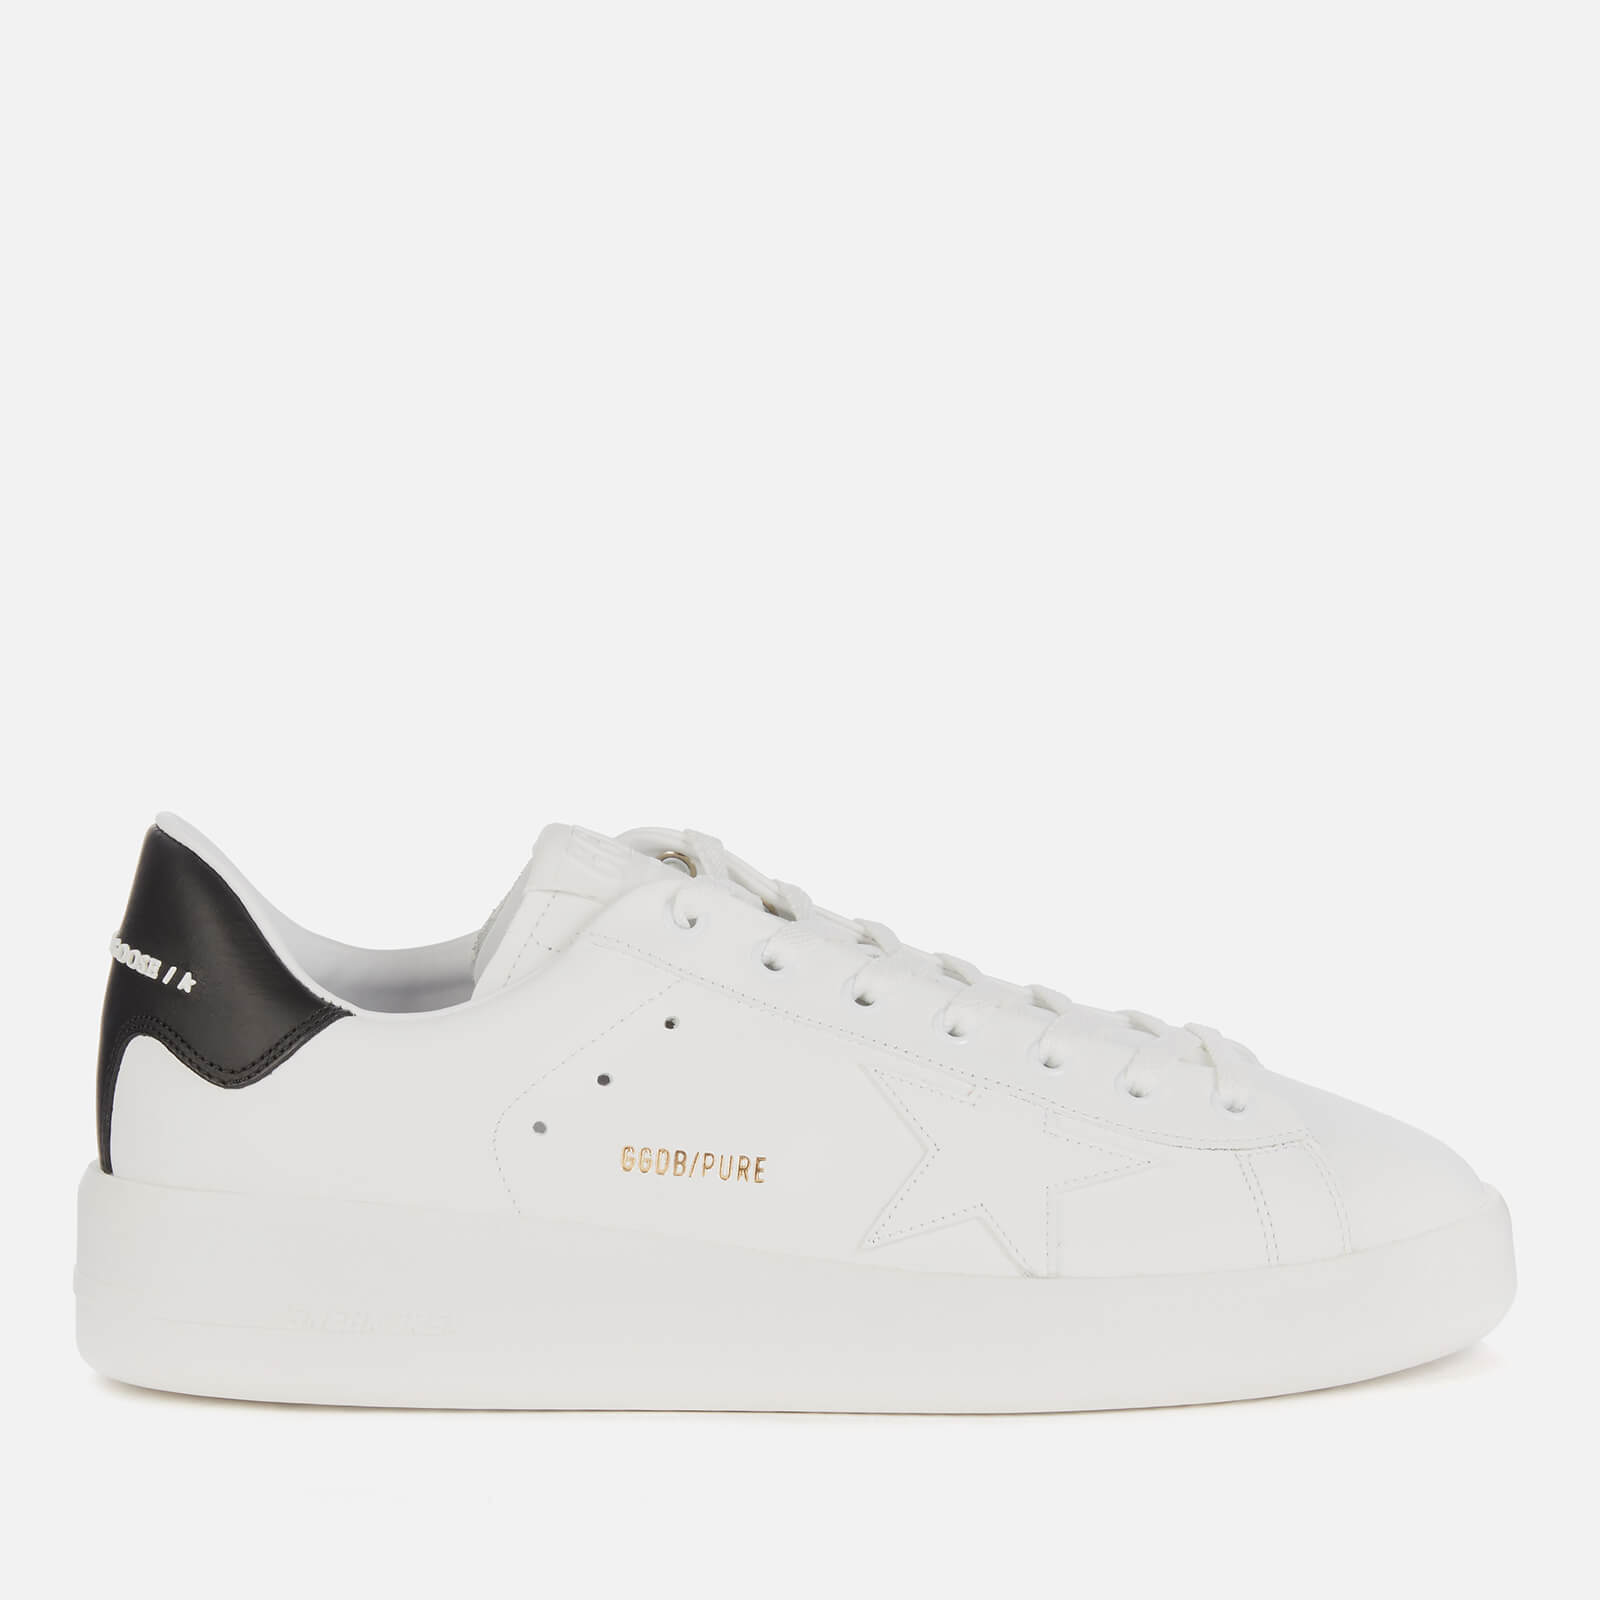 Golden Goose Deluxe Brand Men's Pure Star Leather Trainers - White/Black - UK 11